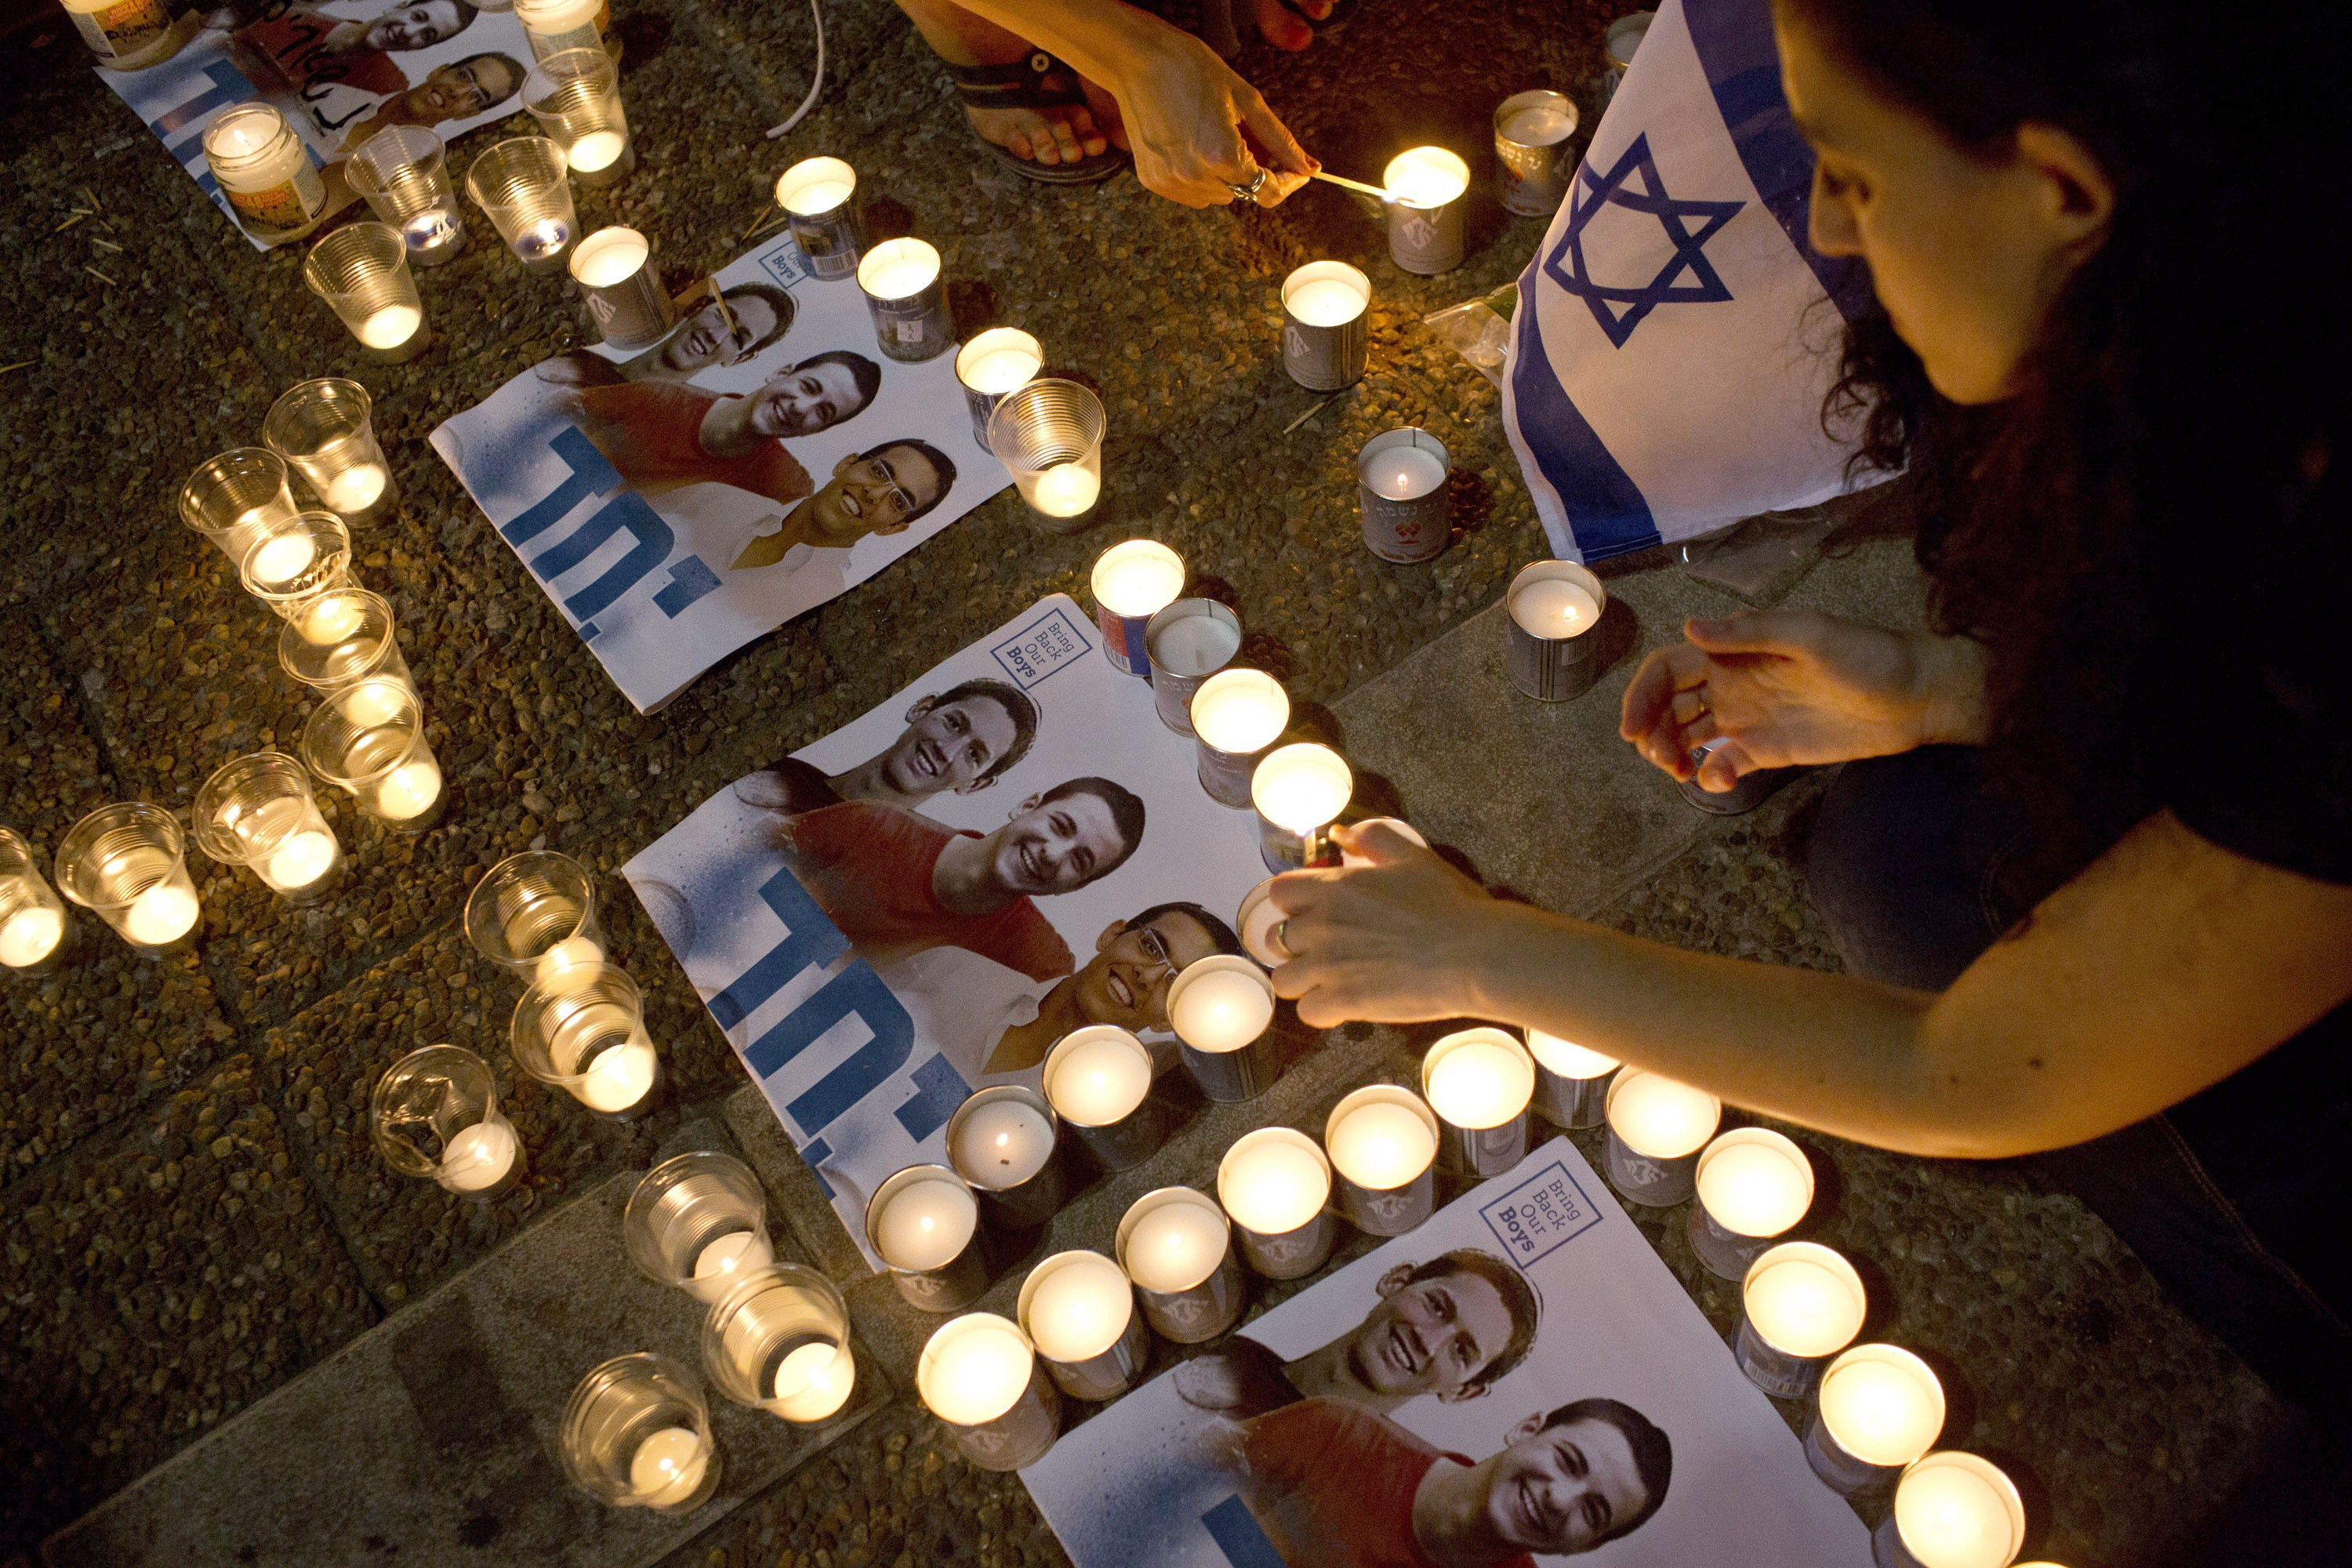 Israelis mourns and light candles in Rabin Square in Tel Aviv on June 30, 2014, after the announcement that the bodies of the three missing Israeli teenagers were found (Oren Ziv—AFP/Getty Images)